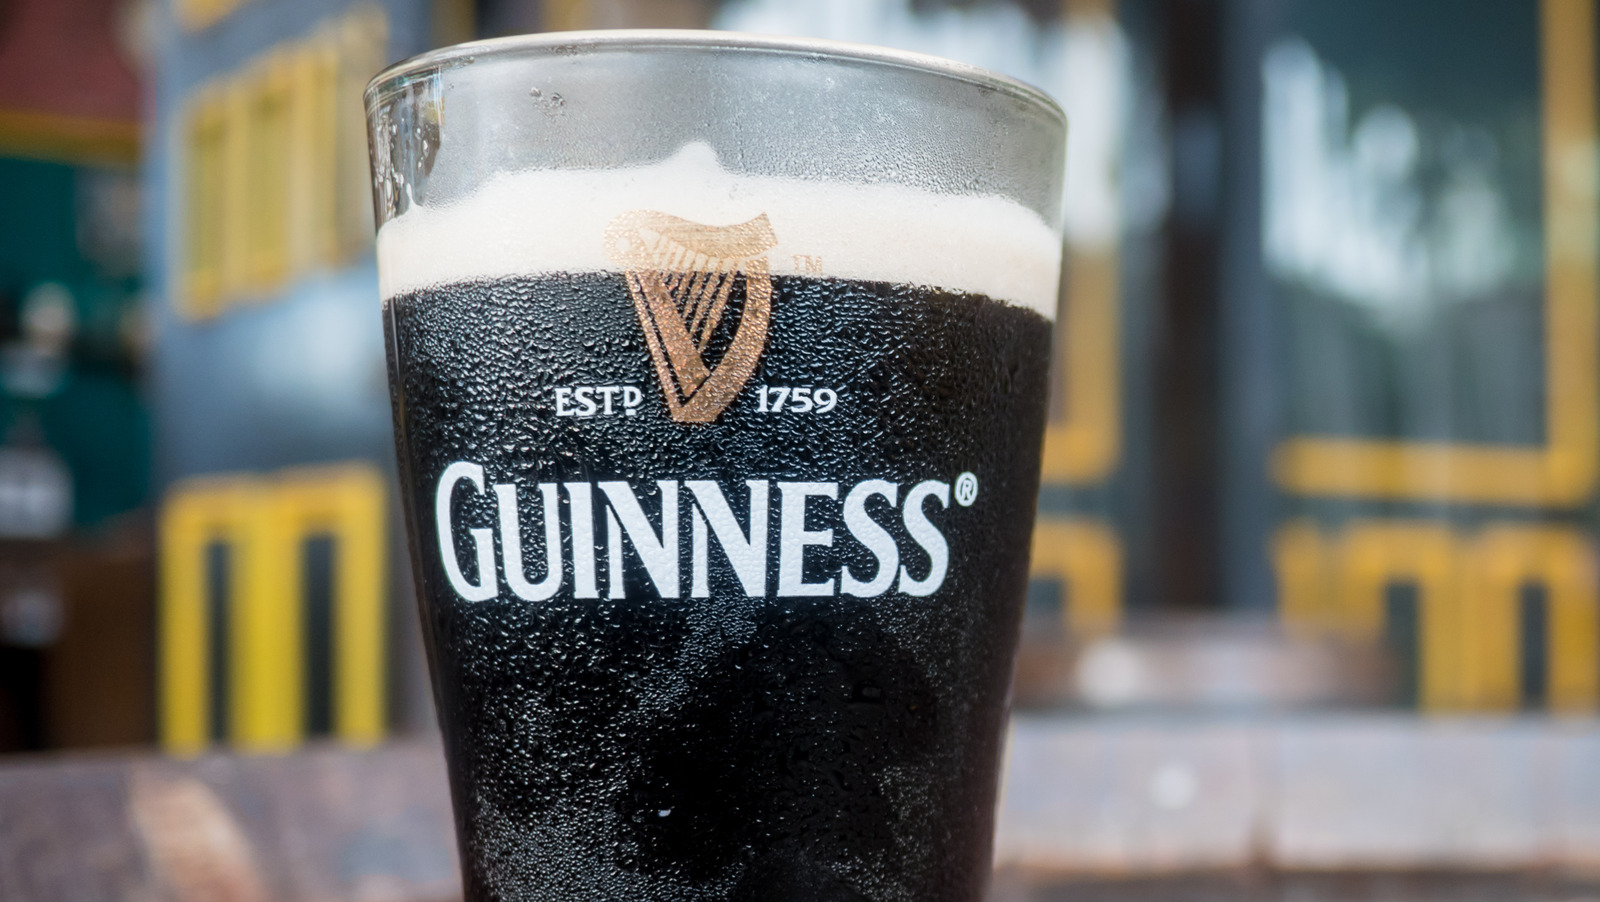 https://www.foodrepublic.com/img/gallery/11-things-you-probably-didnt-know-about-guinness-upgrade/l-intro-1691432493.jpg